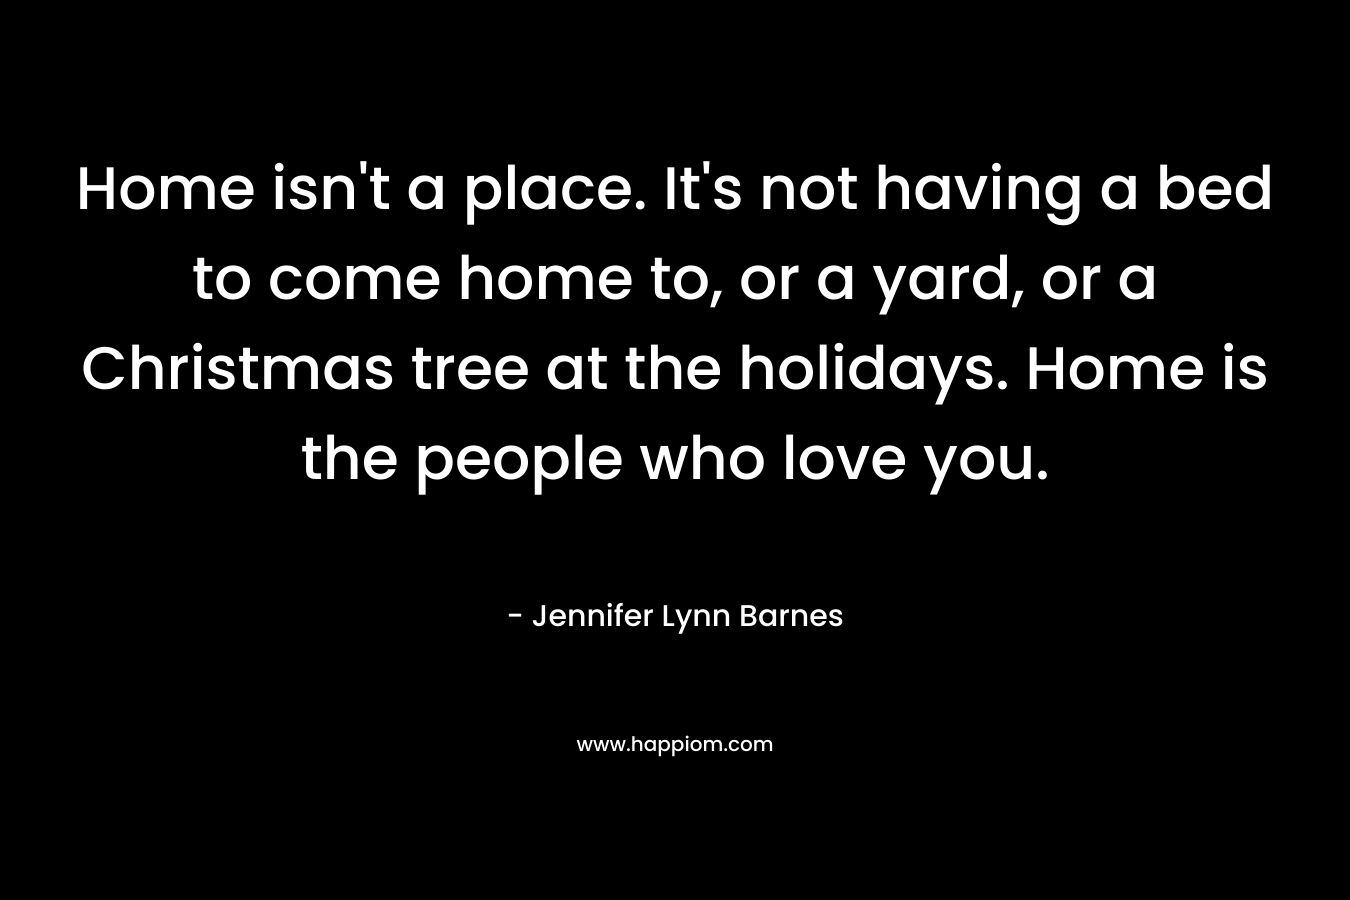 Home isn’t a place. It’s not having a bed to come home to, or a yard, or a Christmas tree at the holidays. Home is the people who love you. – Jennifer Lynn Barnes